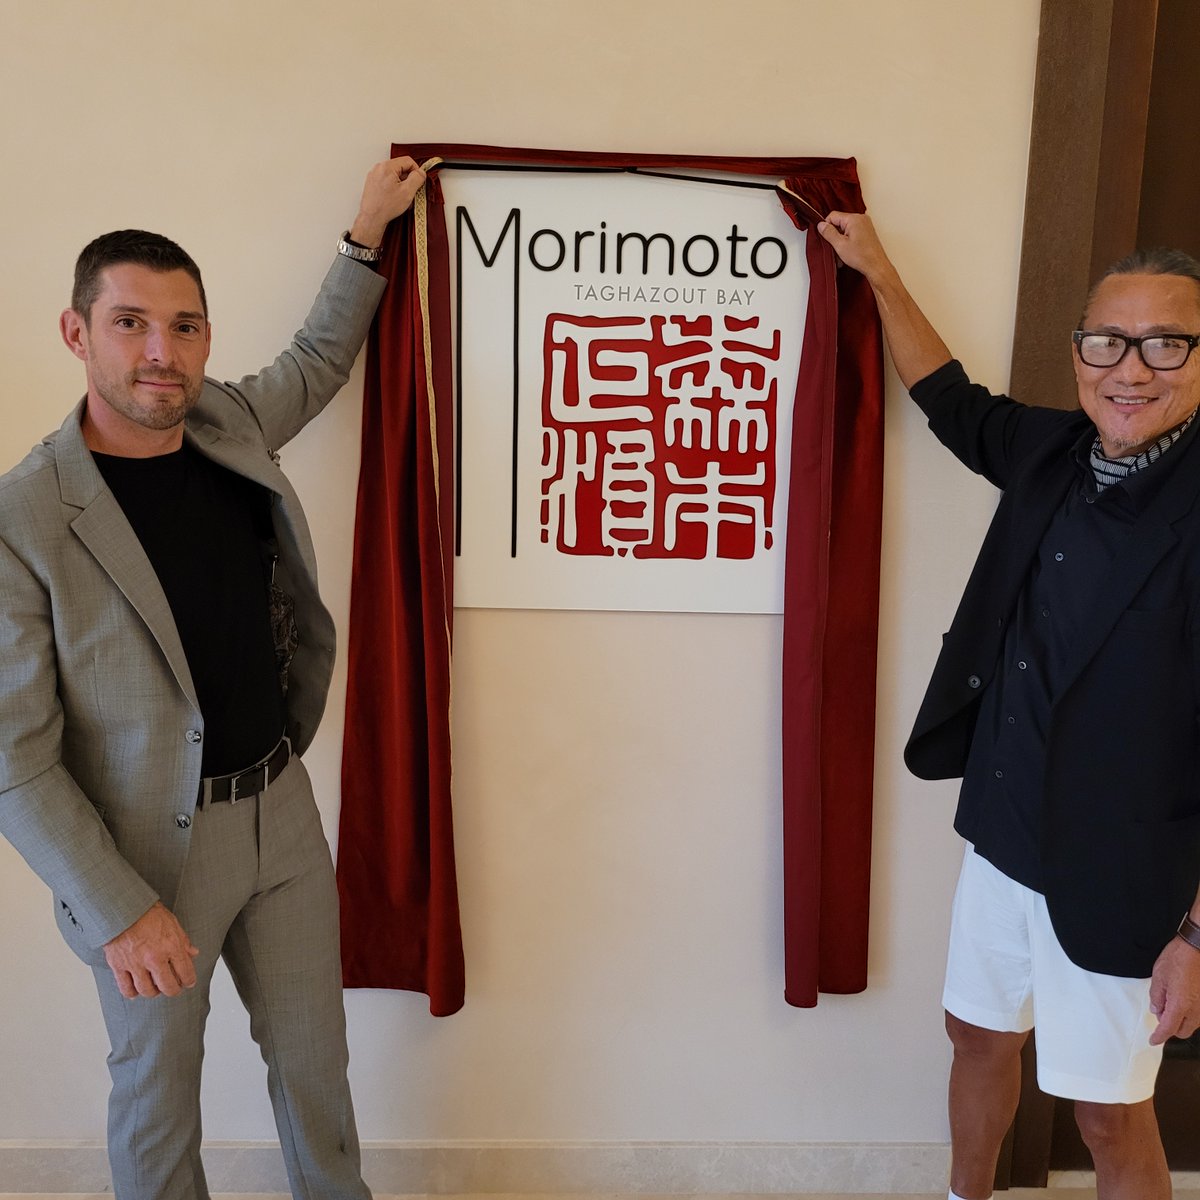 I'm very excited & honored to add a new restaurant to the Morimoto family! Please welcome @MorimotoTagBay at the @FairmontHotels in Morocco. We had our Grand Opening Party w/ a giant sushi roll for the attendees. My team looks forward to serving you soon!